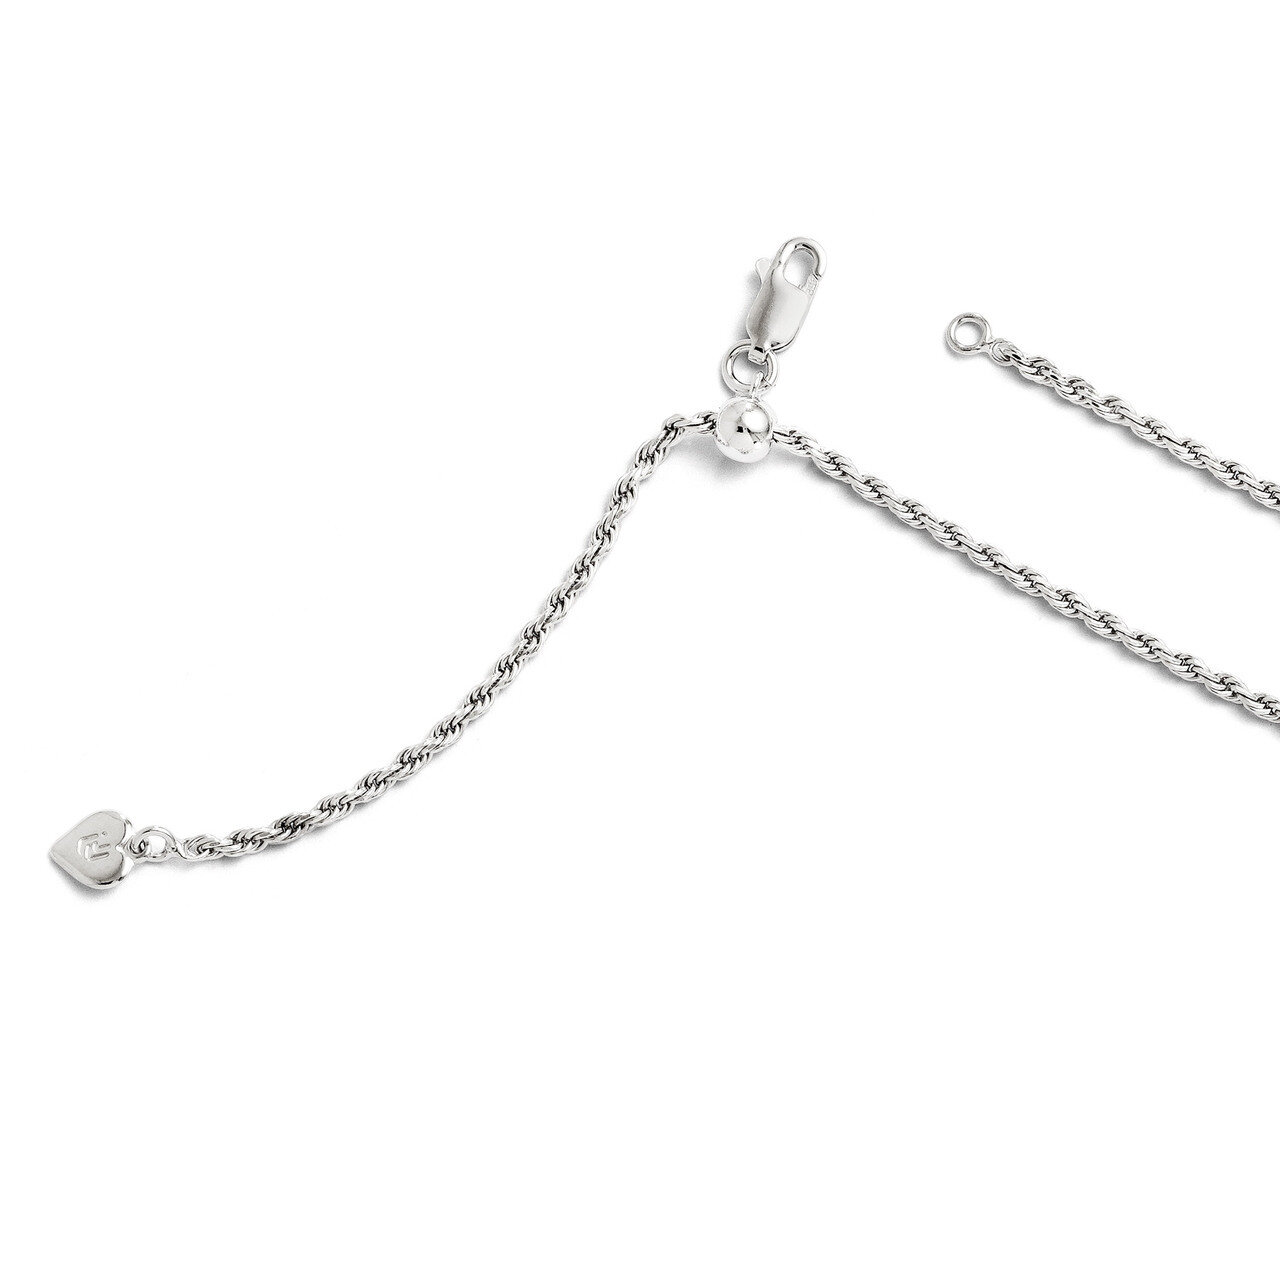 Adjustable Rope Chain 22 Inch - Sterling Silver HB-FC26-22